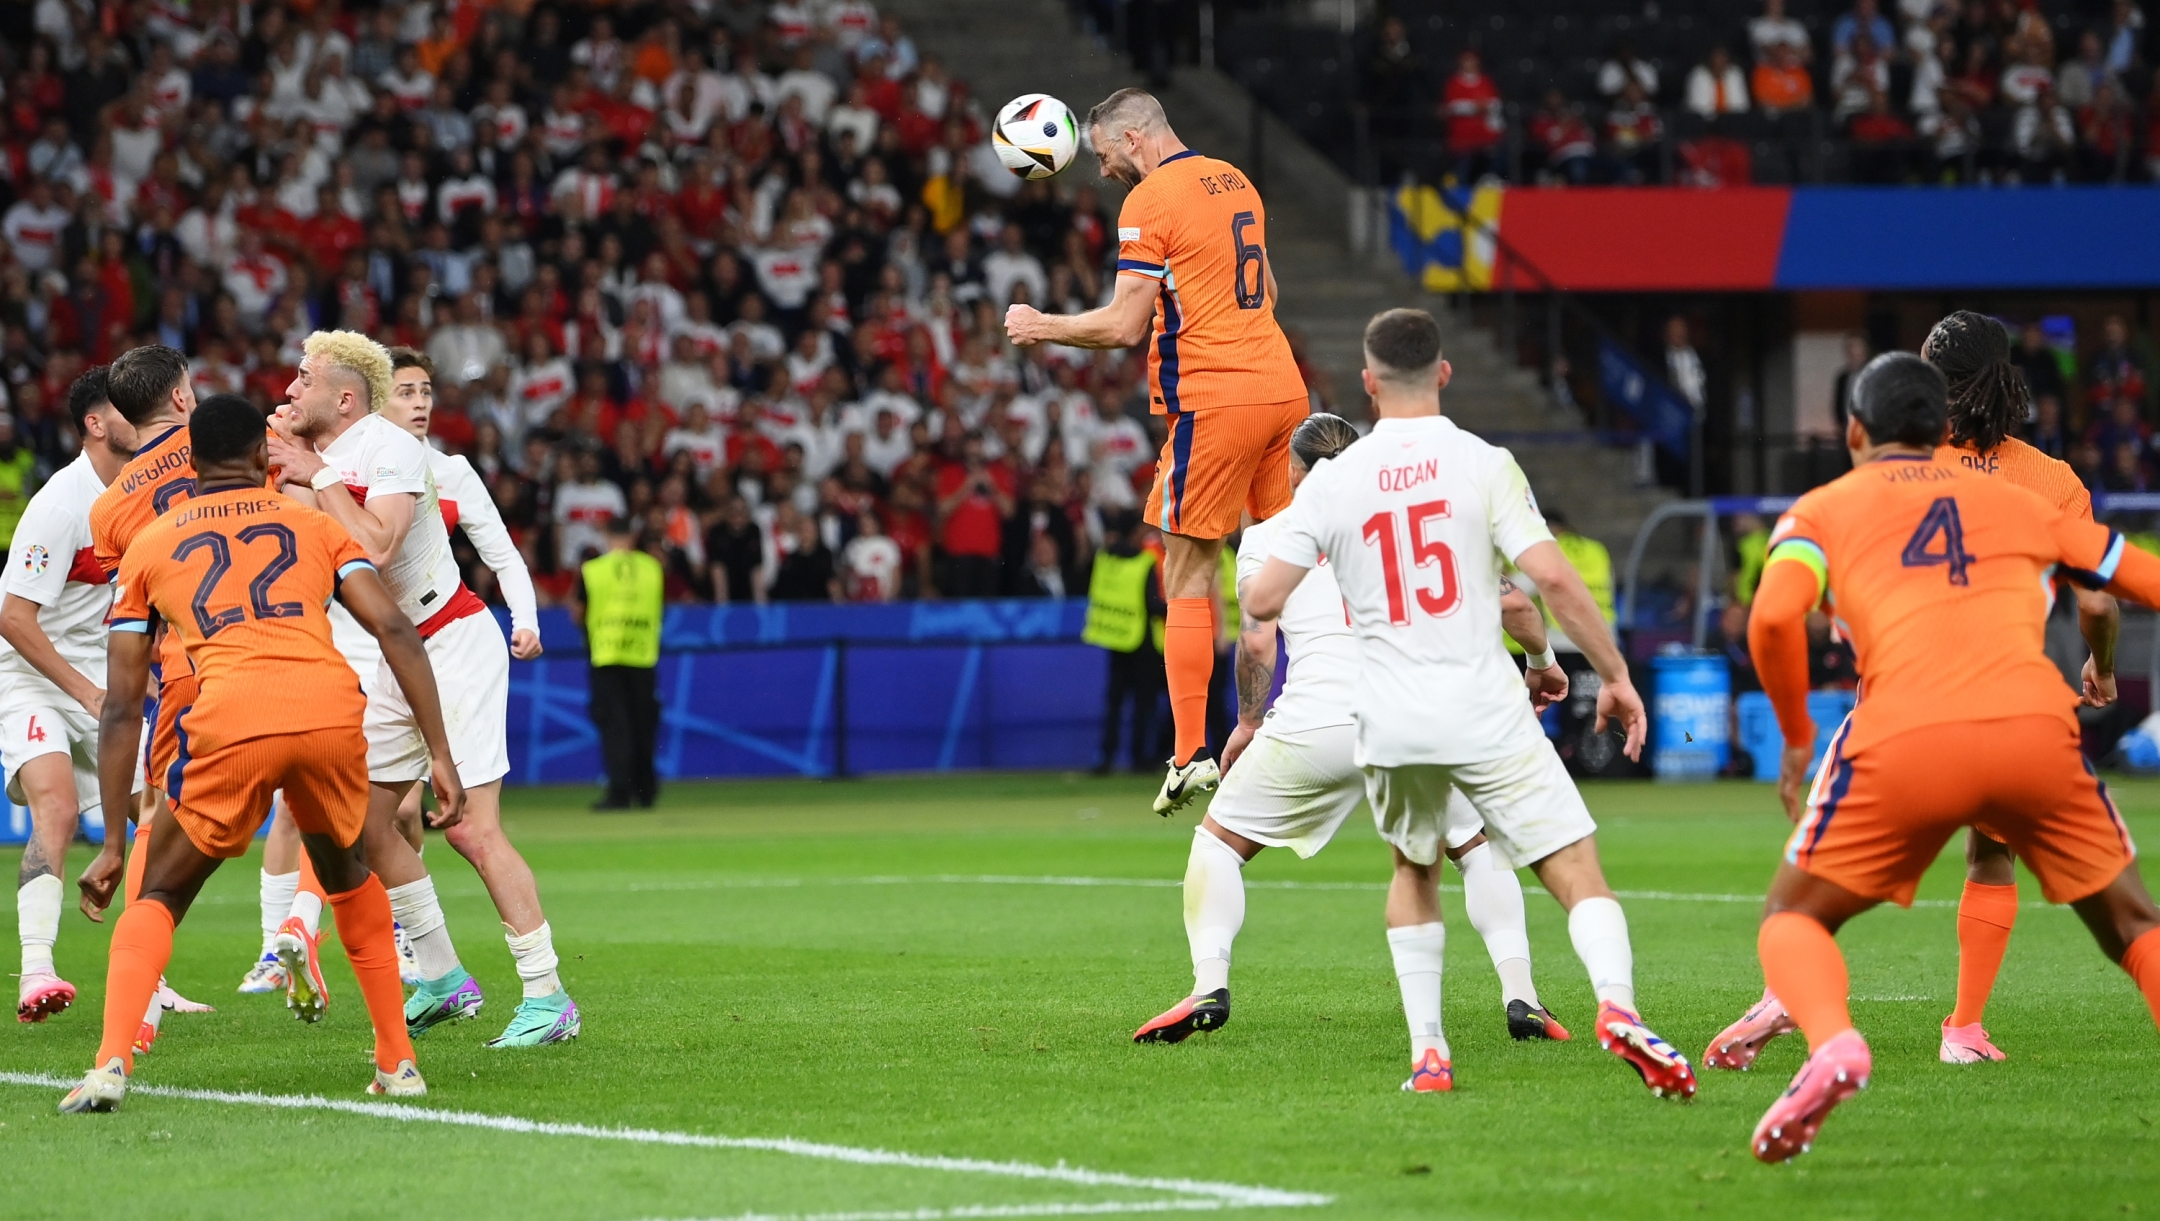 BERLIN, GERMANY - JULY 06: Stefan de Vrij of the Netherlands scores his team's first goal with a header during the UEFA EURO 2024 quarter-final match between Netherlands and Türkiye at Olympiastadion on July 06, 2024 in Berlin, Germany. (Photo by Justin Setterfield/Getty Images)